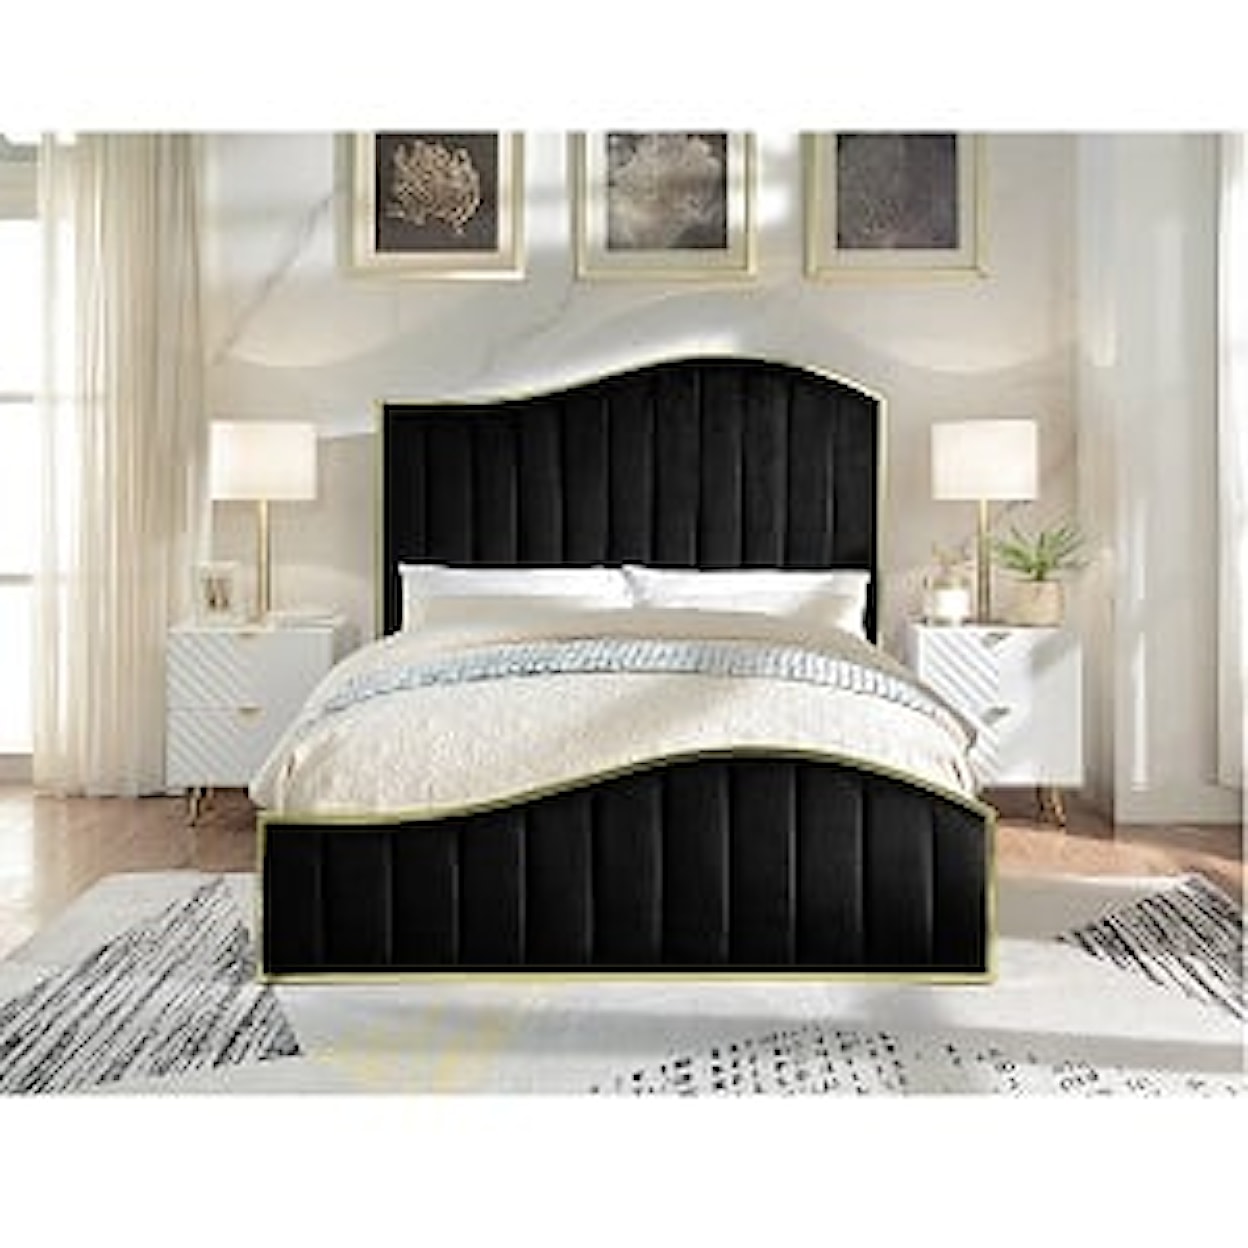 Acme Furniture Gainell Queen Bed